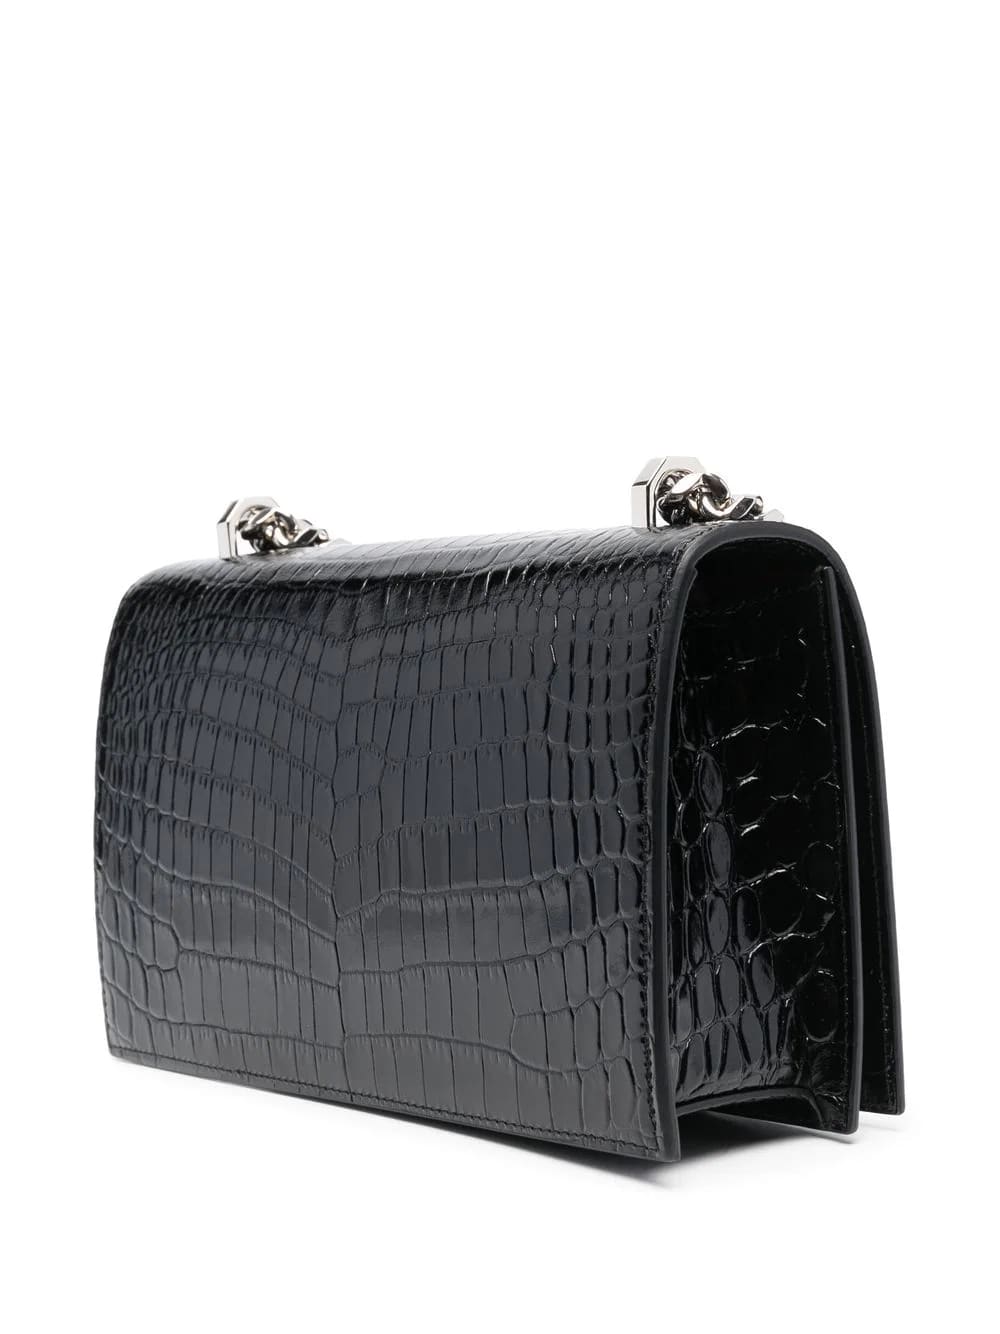 Shop Alexander Mcqueen Black And Silver Jewelled Satchel Bag In Crocodile-effect Leather